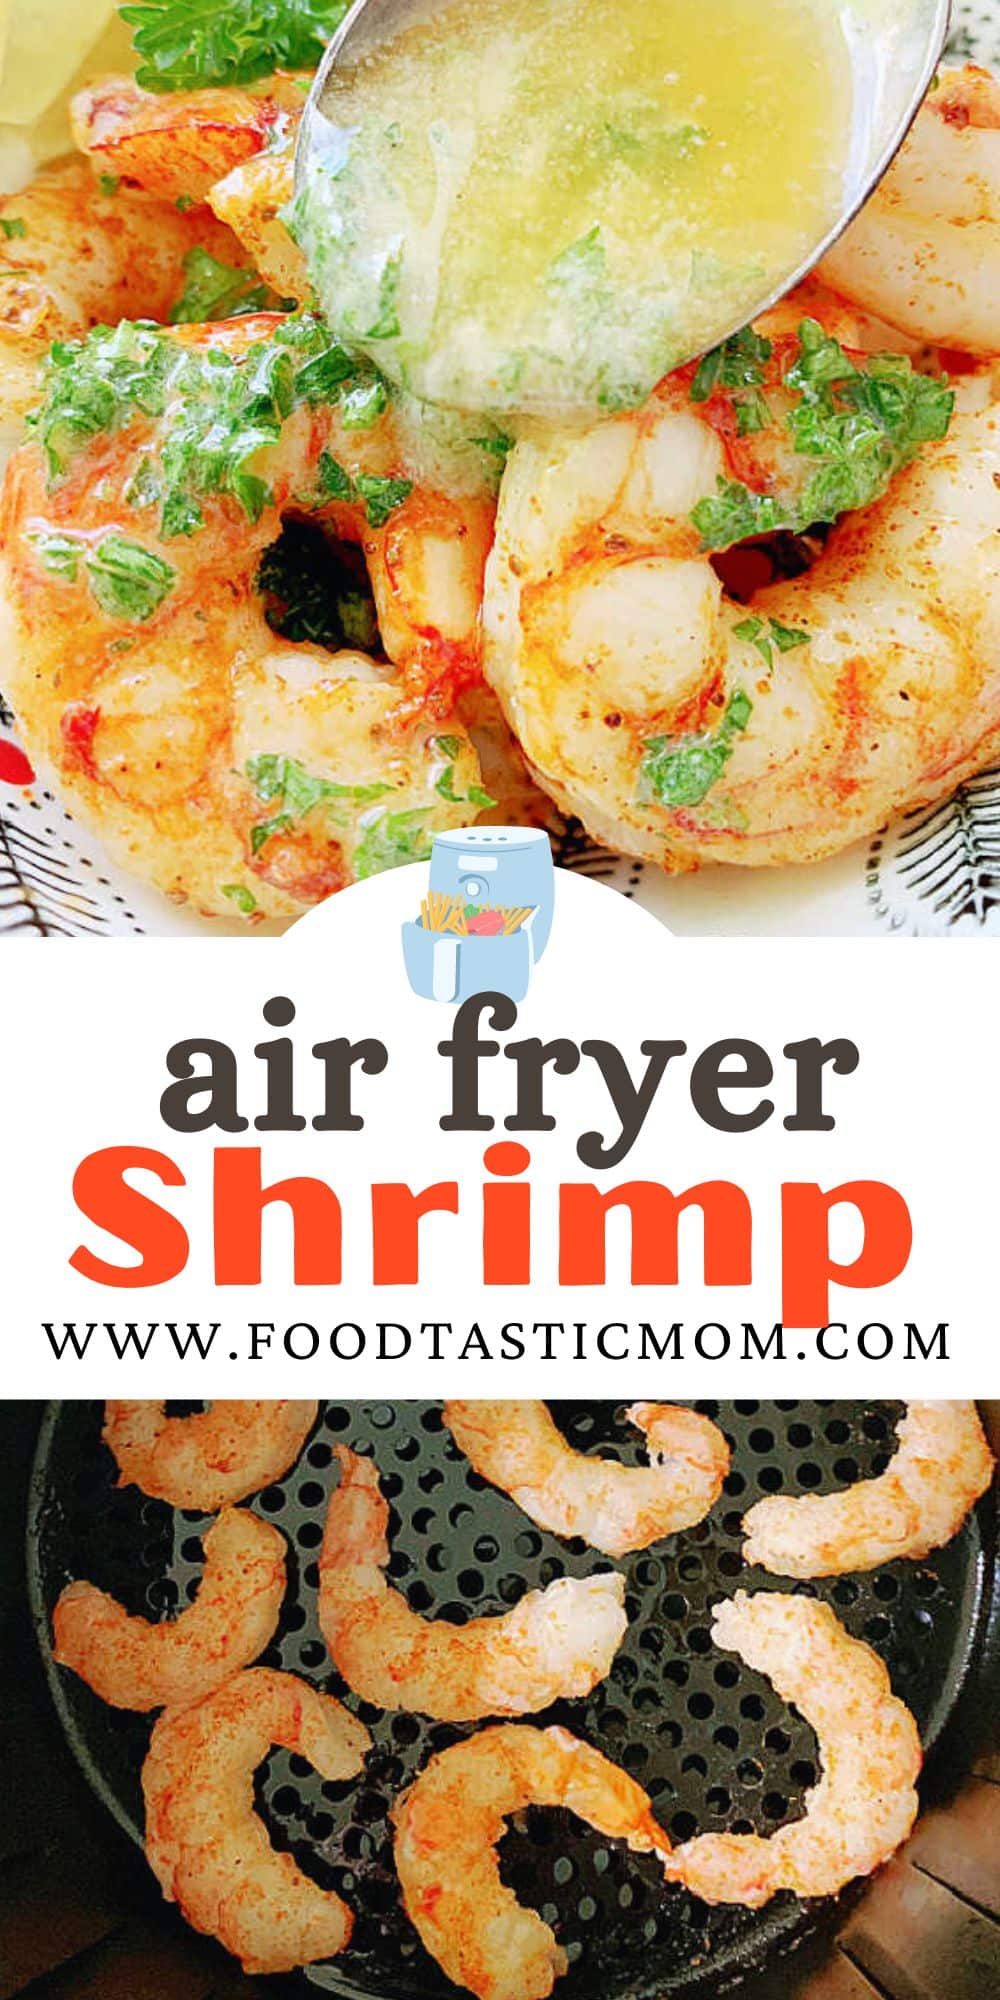 Look no further than this easy air fryer shrimp recipe for the best results when cooking shrimp with buttery sauce and Old Bay seasoningLook no further than this easy air fryer shrimp recipe for the best results when cooking shrimp with buttery sauce and Old Bay seasoning. via @foodtasticmom